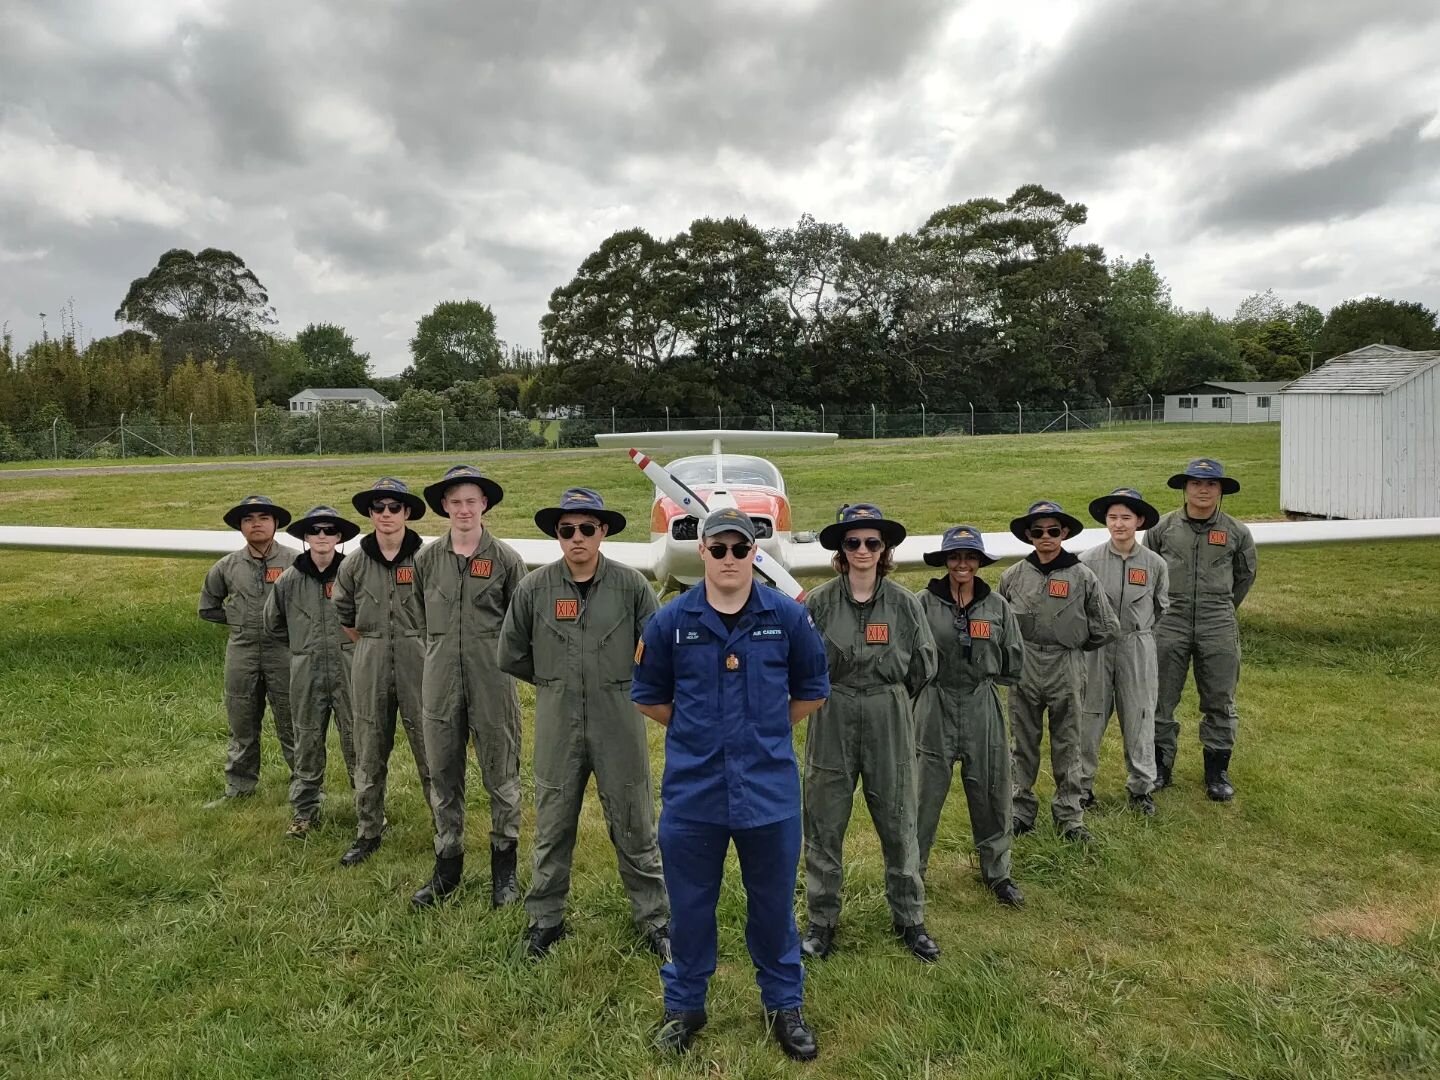 After 4 long years,19SQN finally took to the skies once again for our annual gliding camp!

Cadets were able to get a first hand experience in traditional gliders and motor gliders,as well as helping out with tasks on the airfield.

Big thank you to 